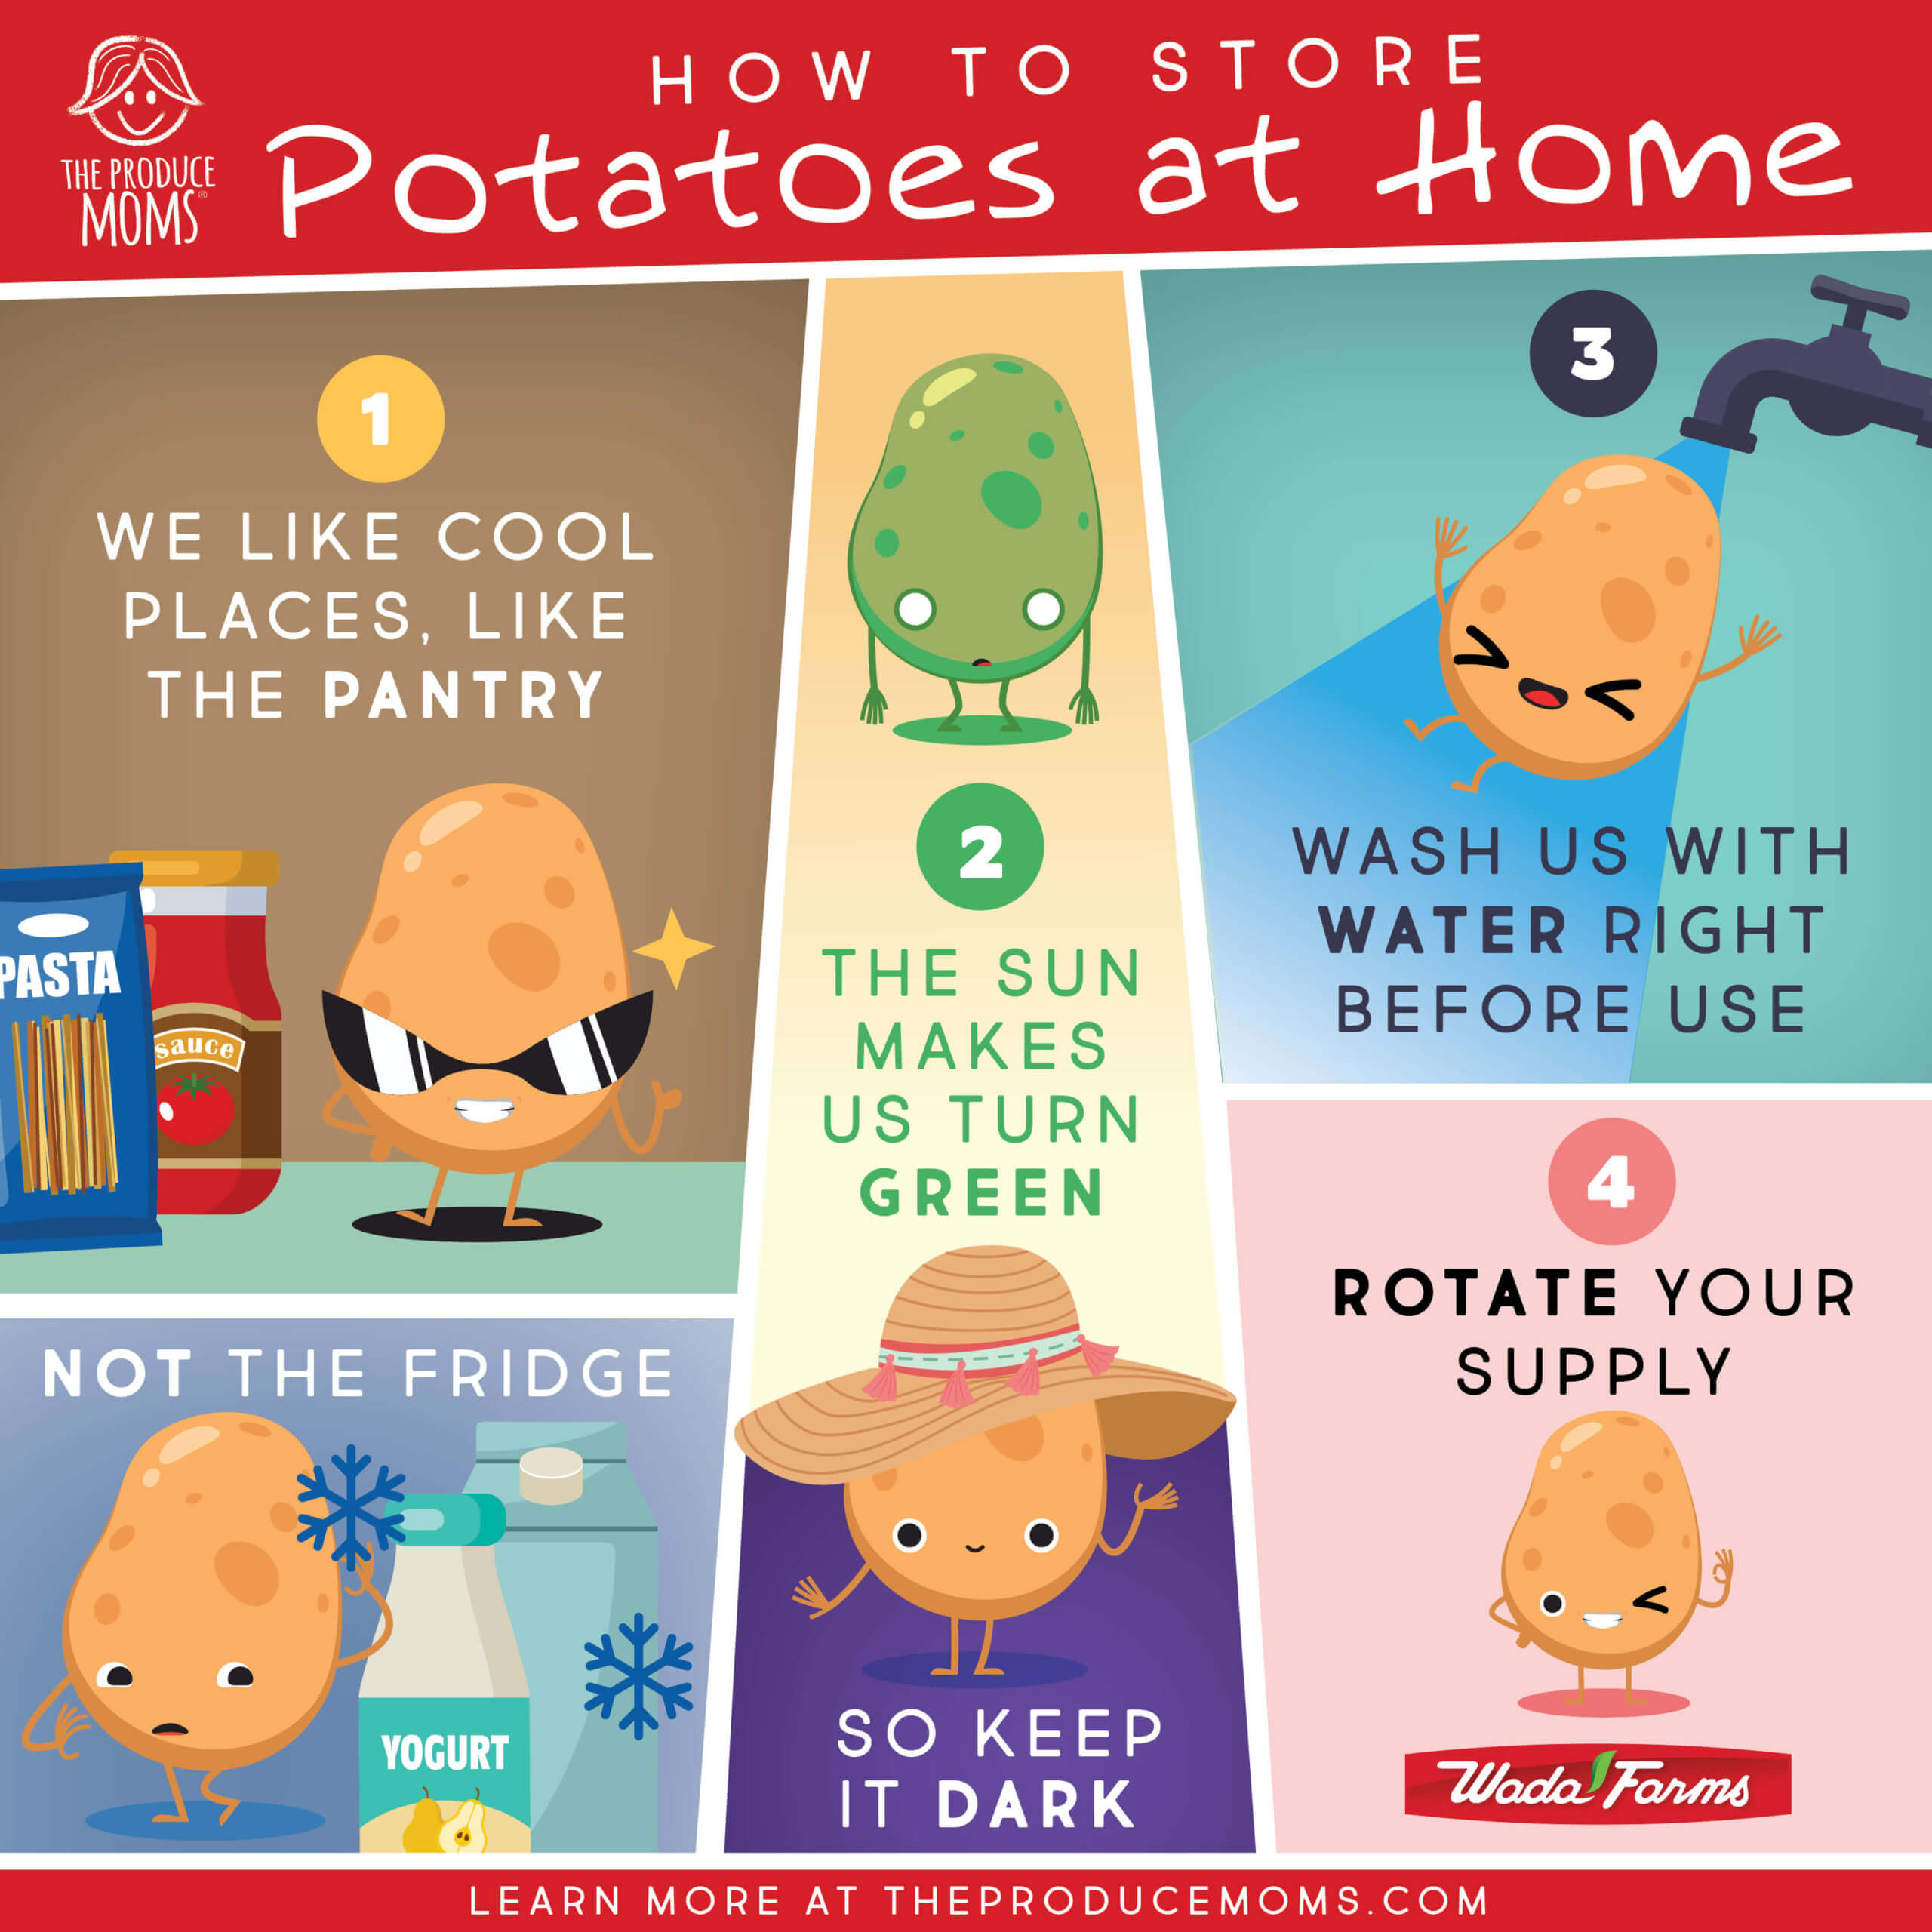 How To Store Potatoes